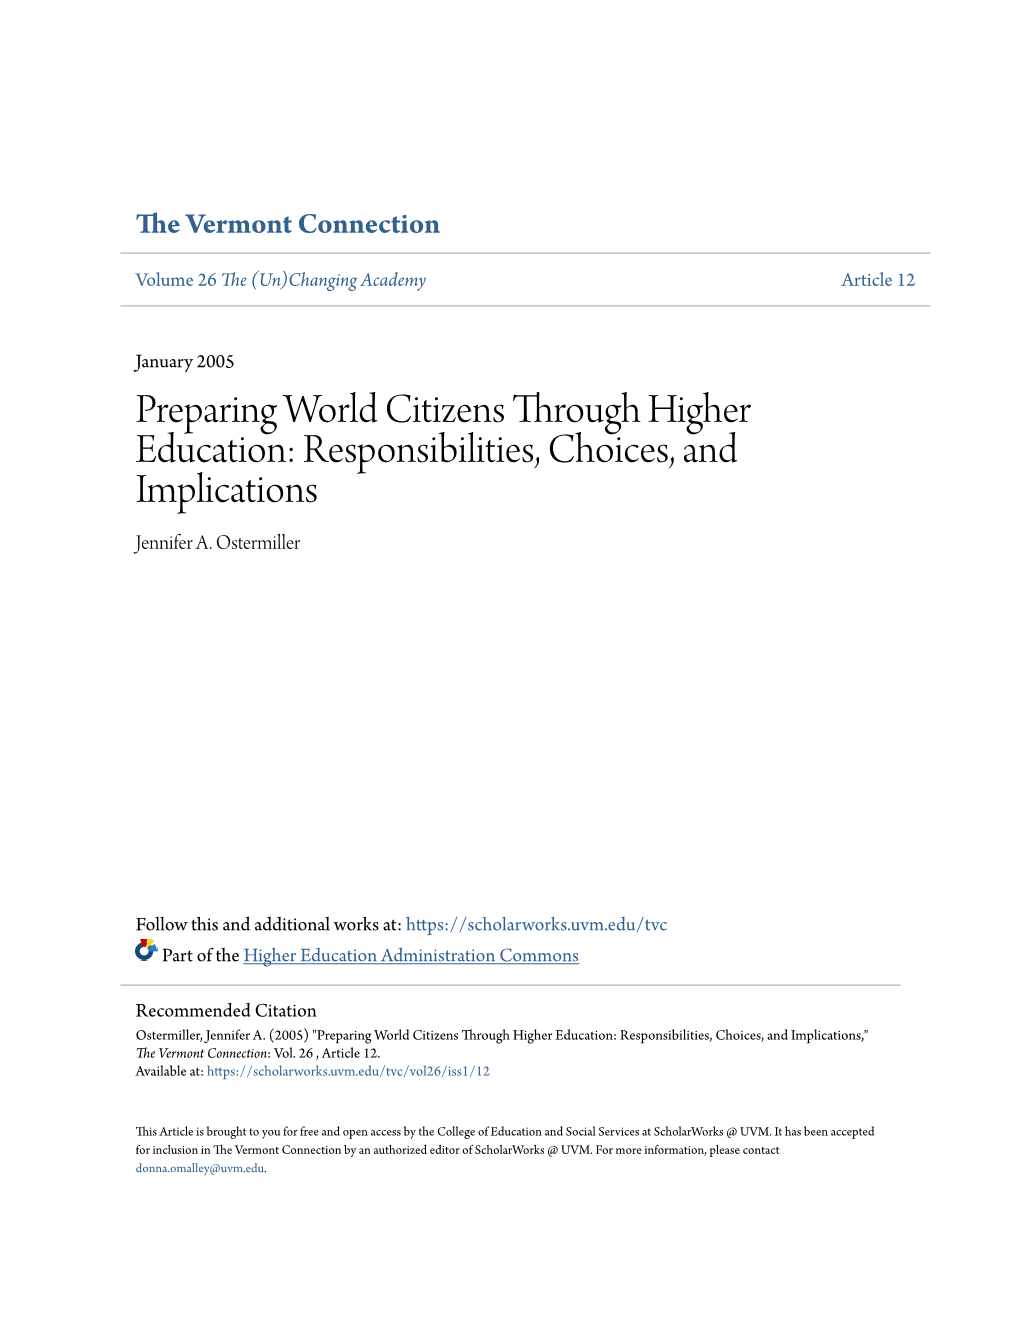 Preparing World Citizens Through Higher Education: Responsibilities, Choices, and Implications Jennifer A